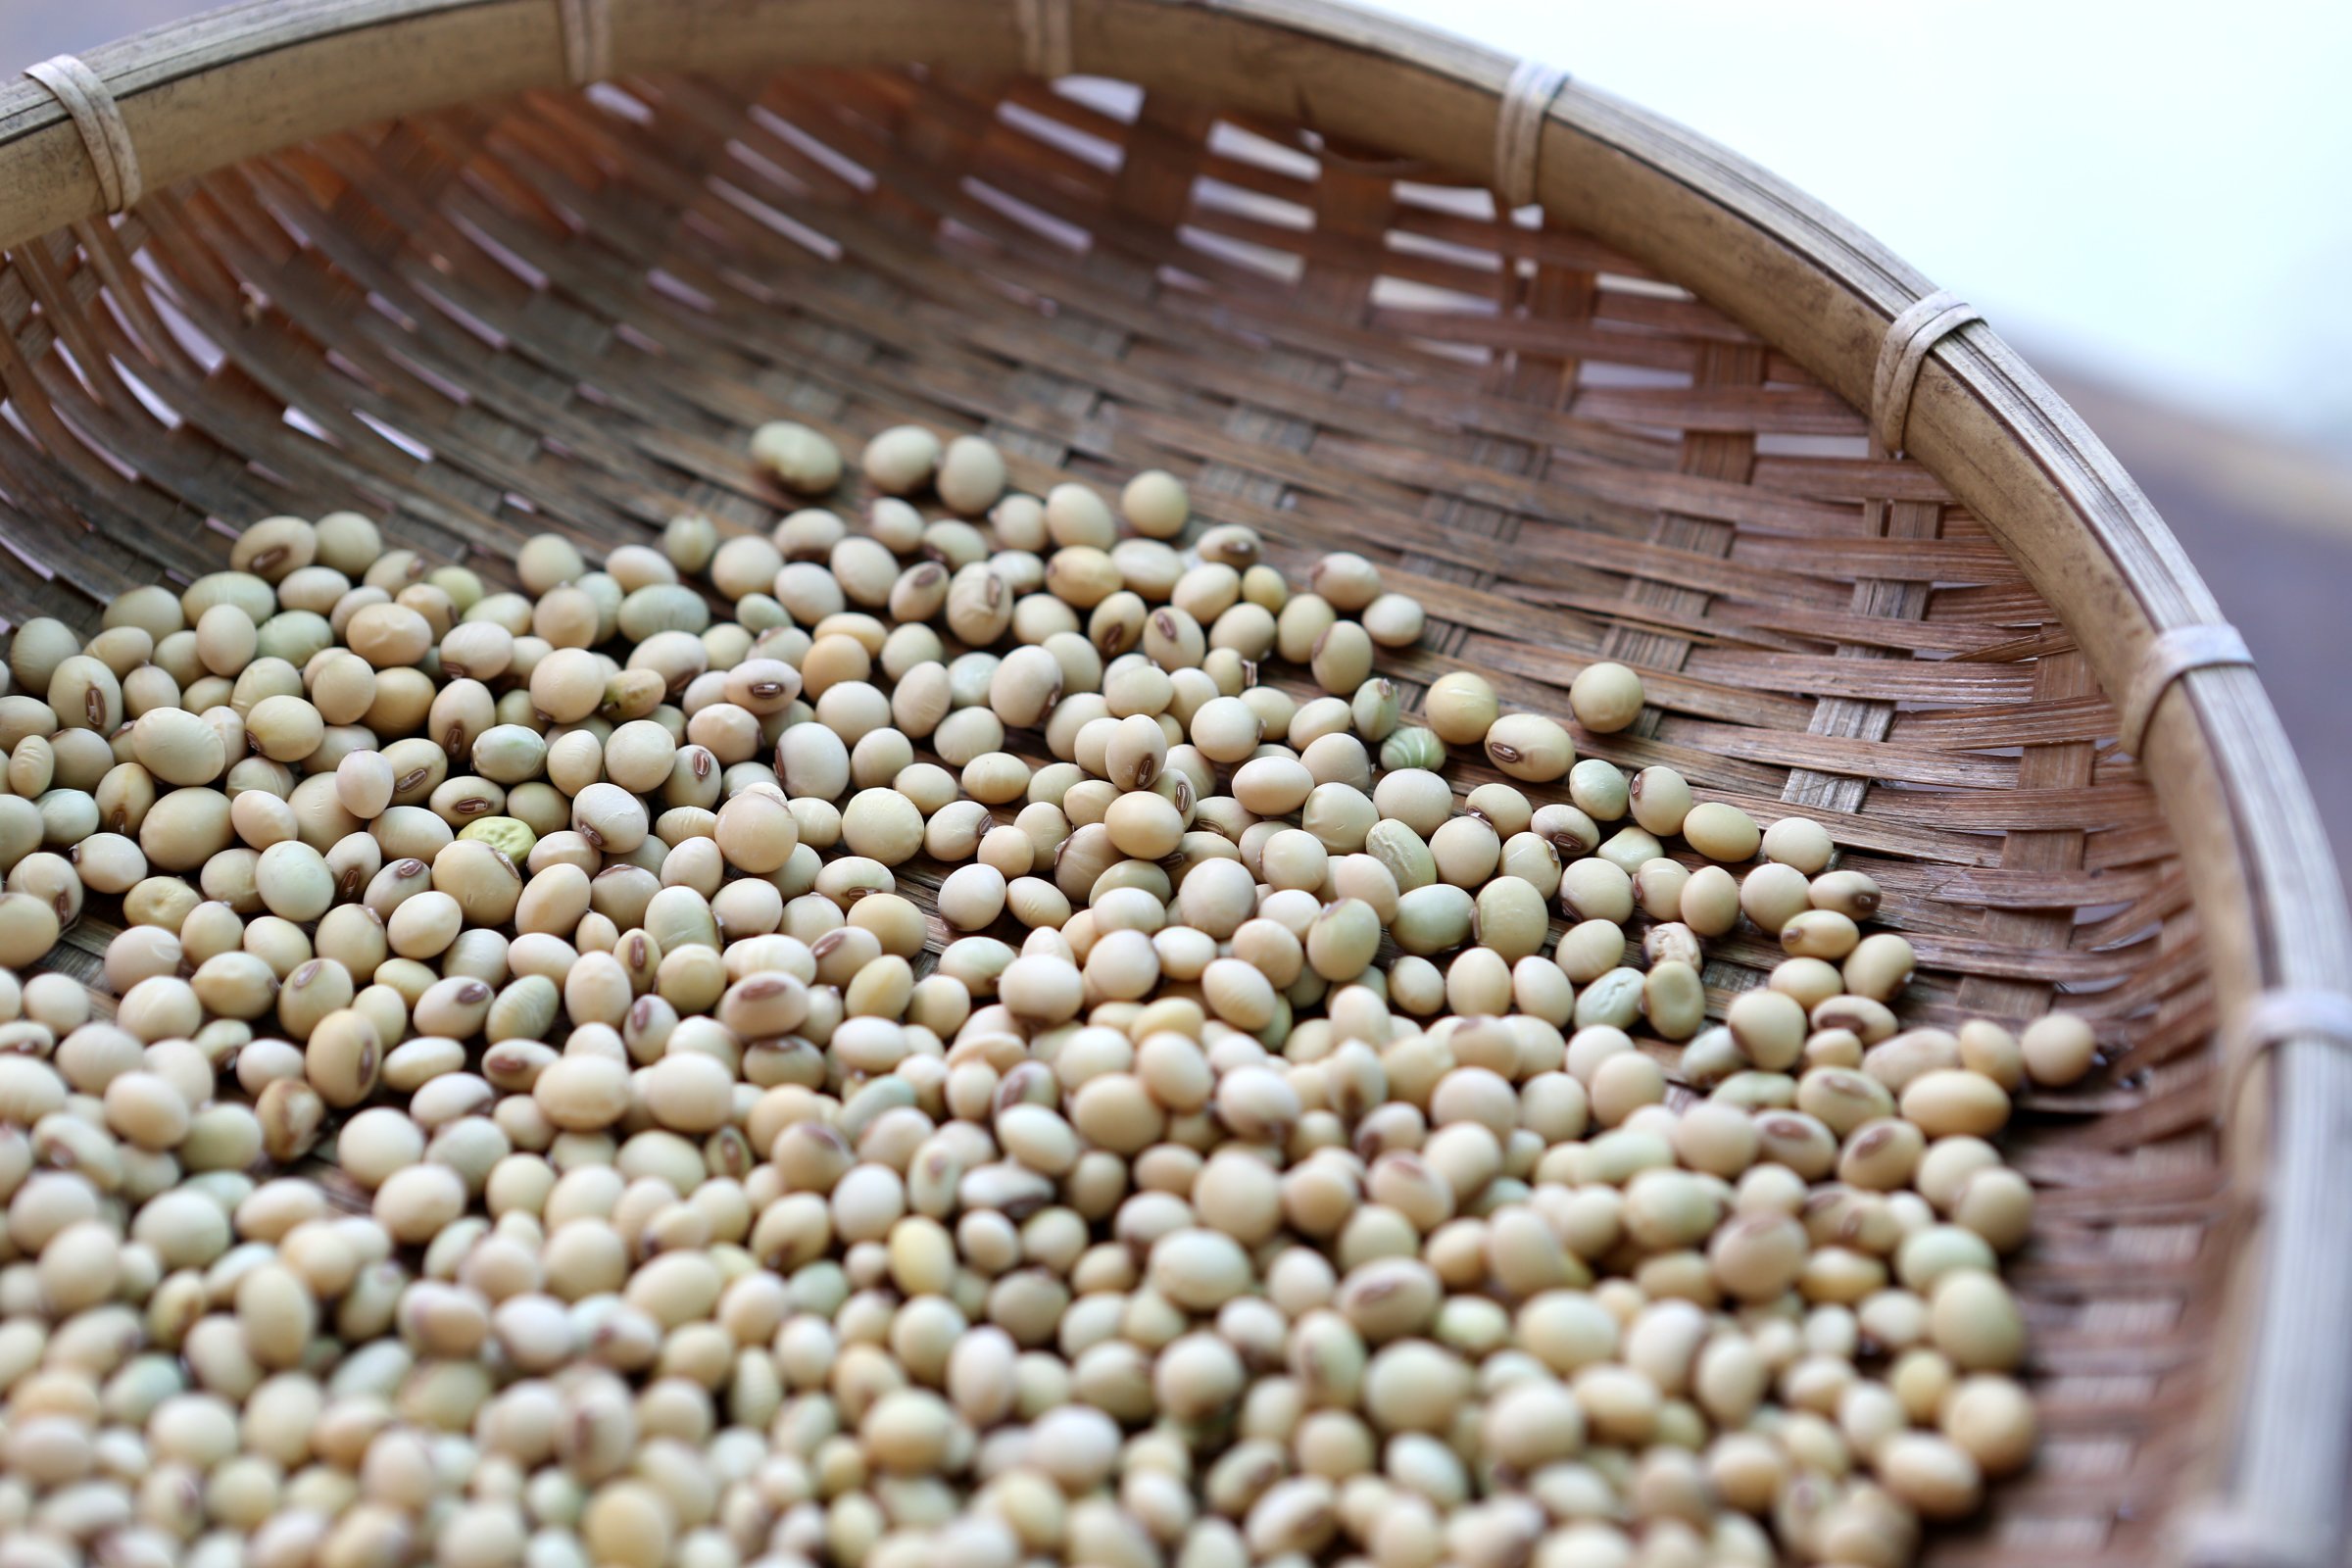 Soybeans in bamboo sieve